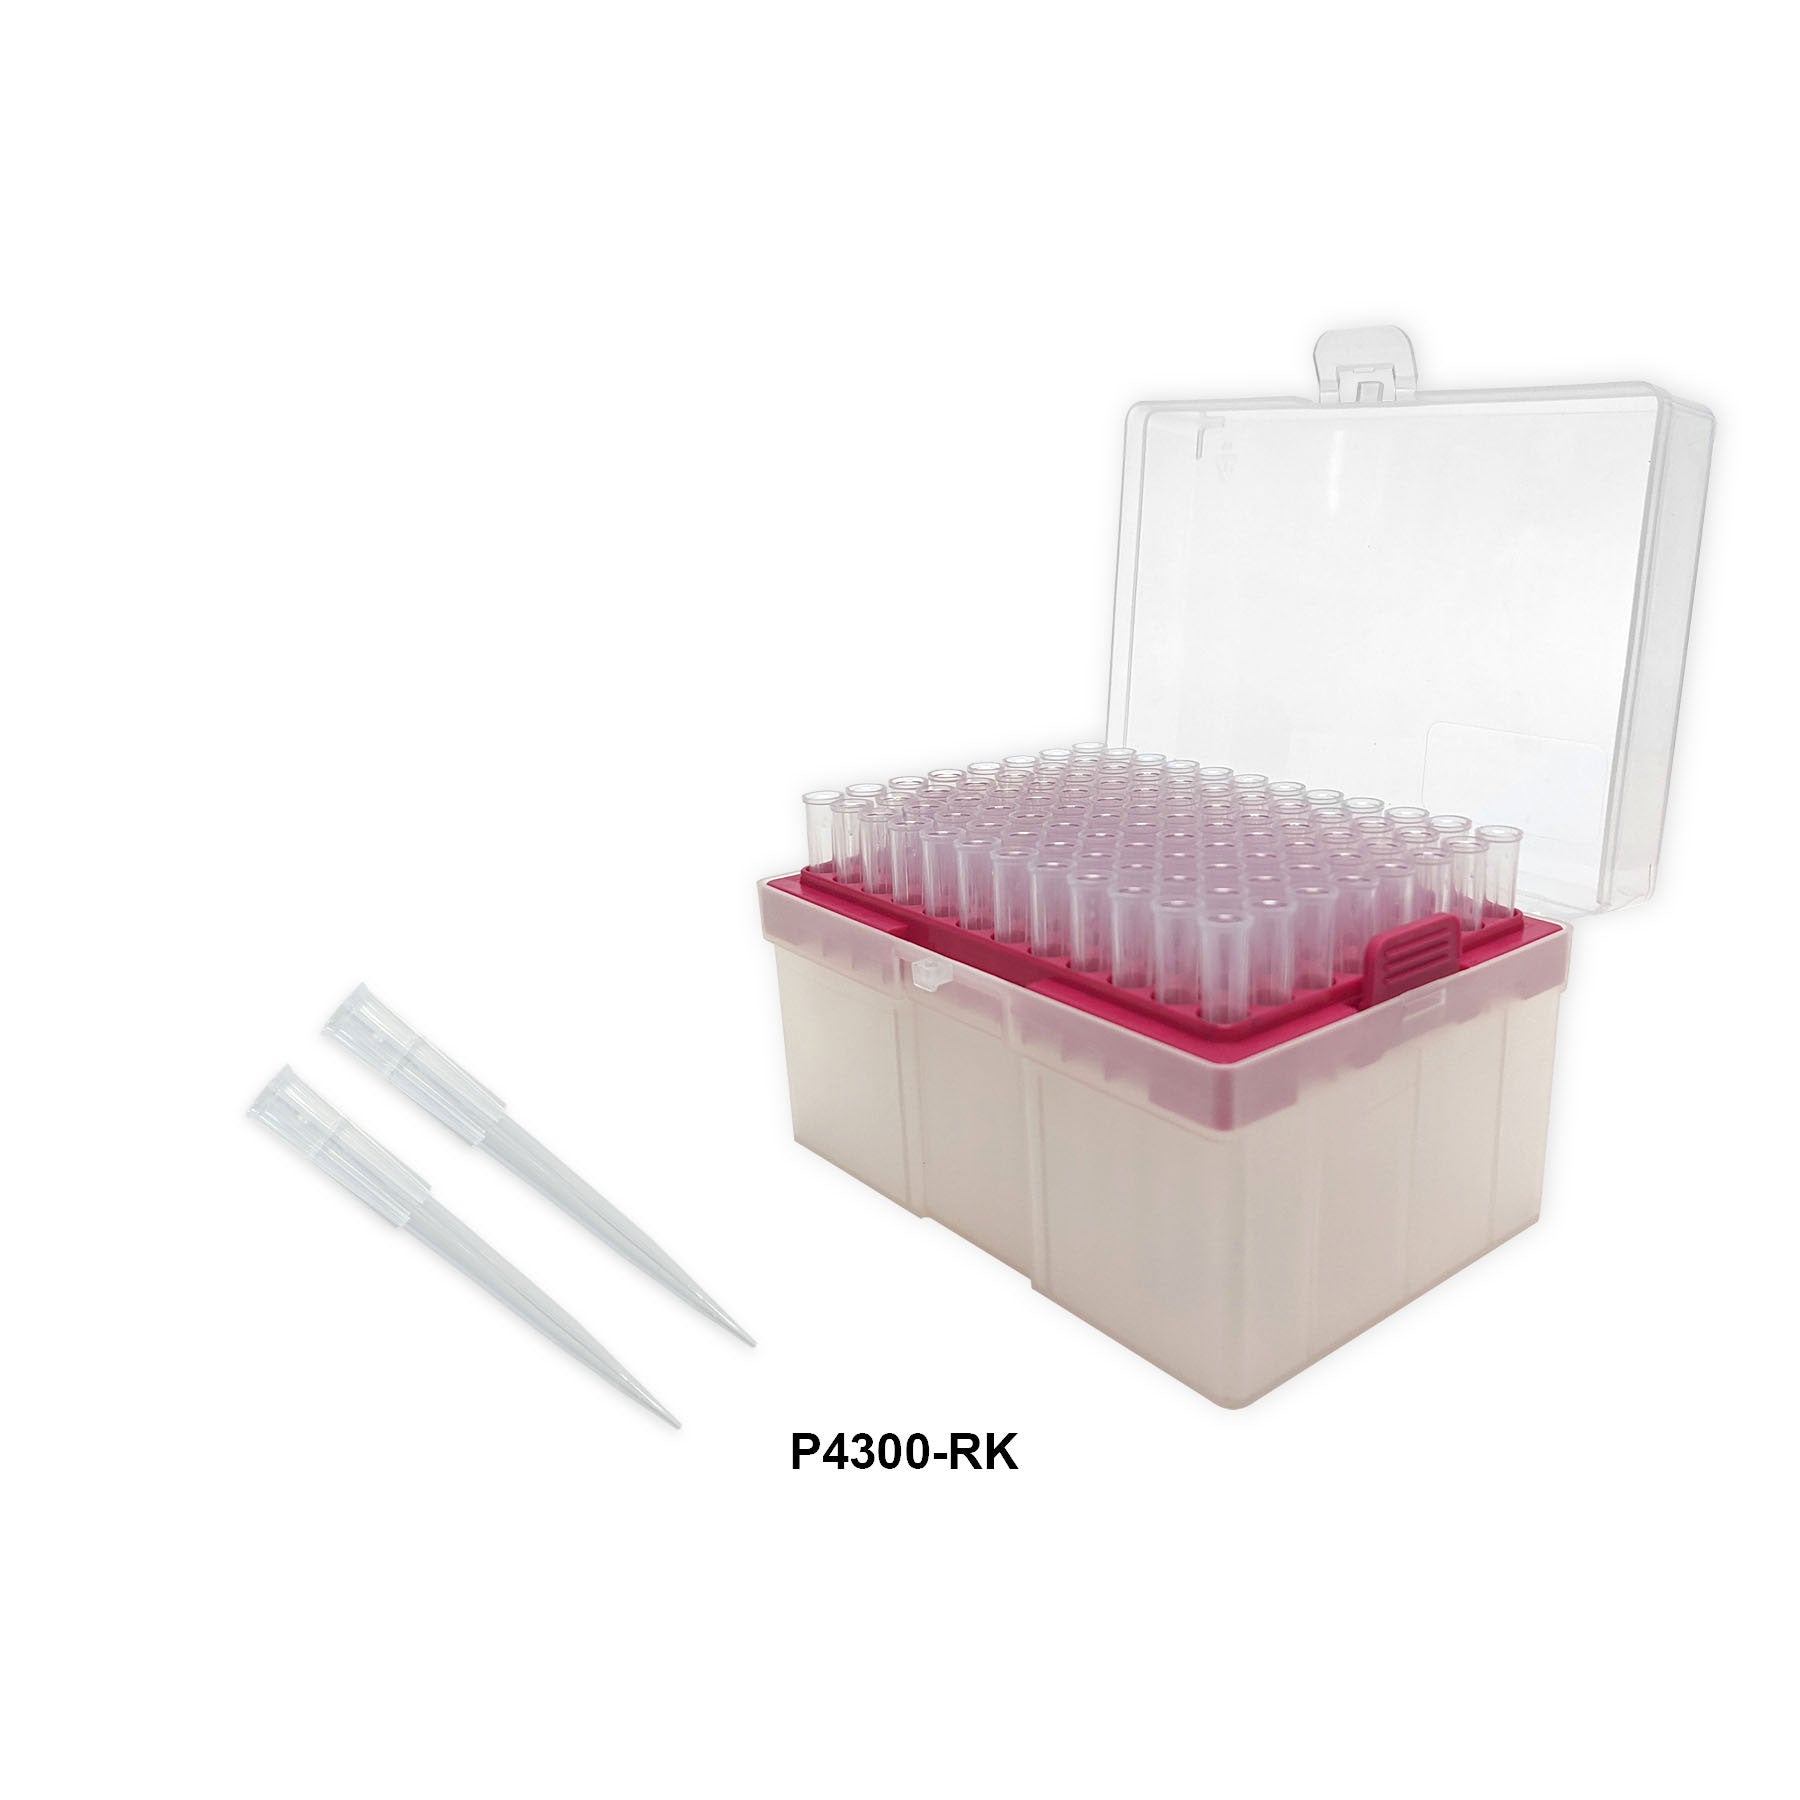 MTC Bio P4300-RK, Pipette Tips, Non-Filtered, 300µl Capacity, Sterile, for 200µl and 300µl Pipettes, 10 Racks of 96 Tips